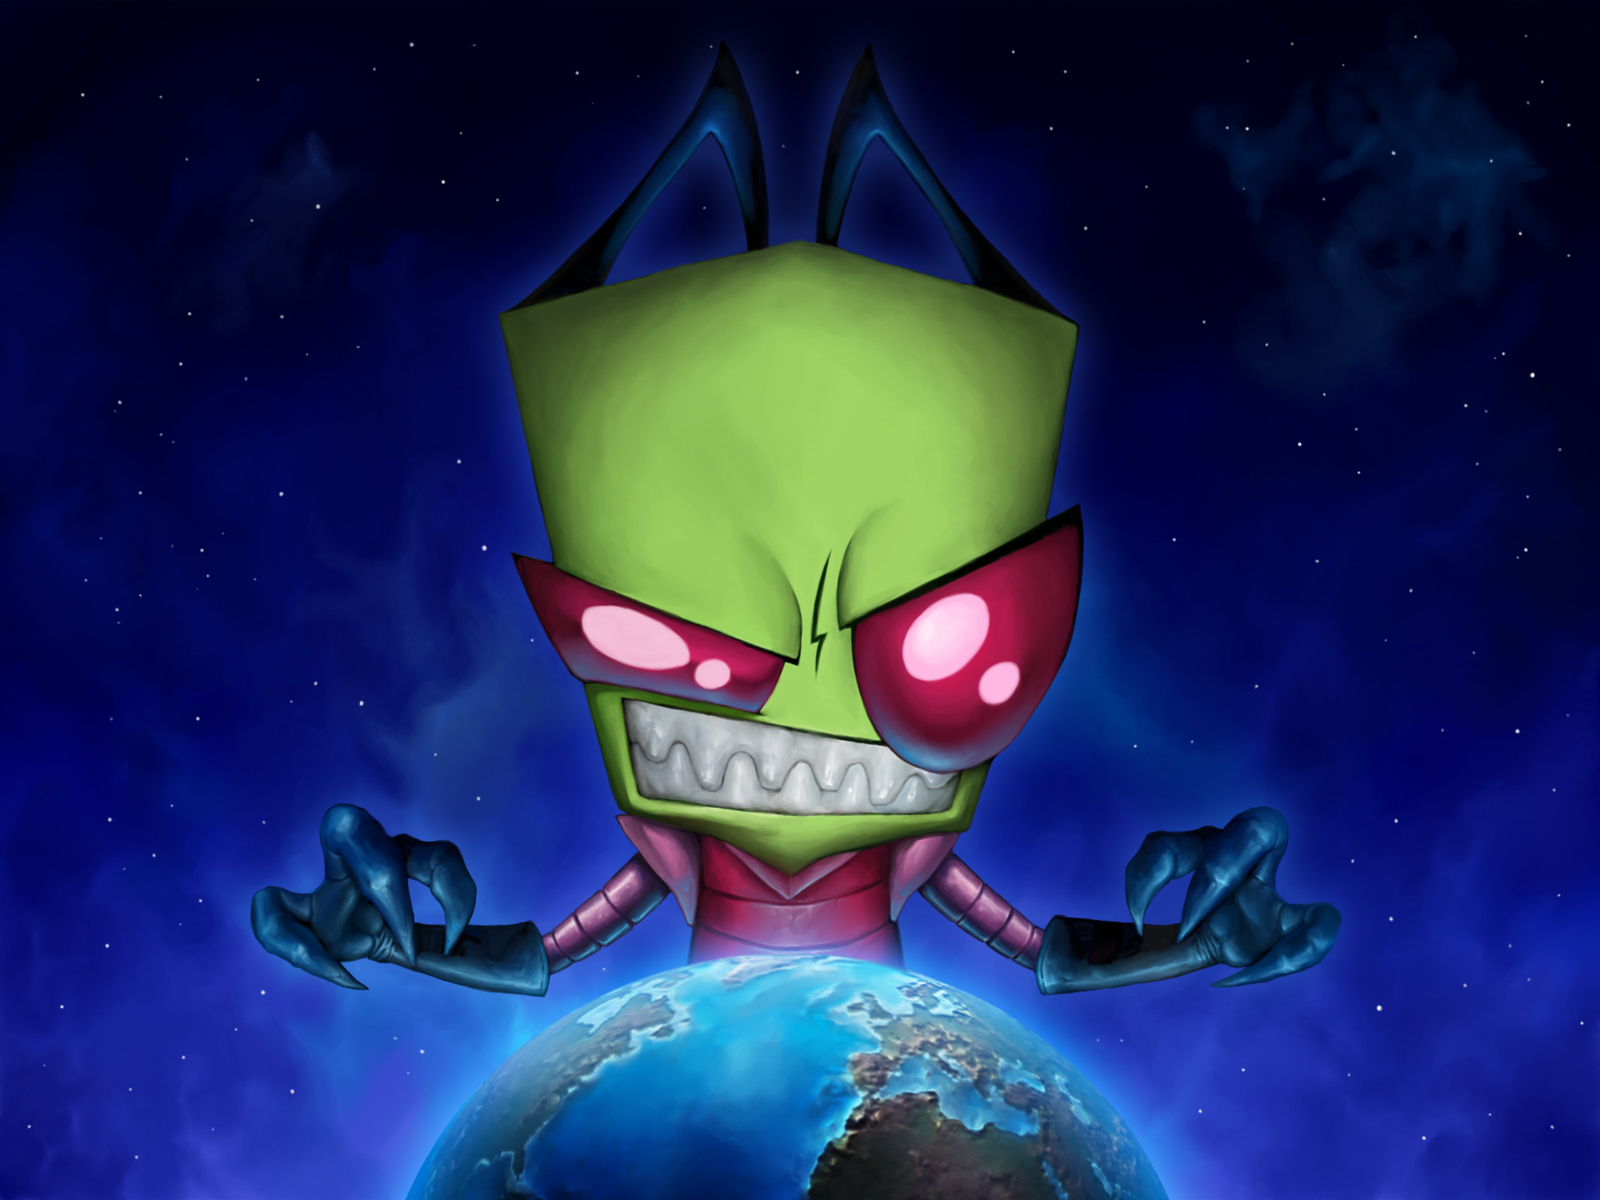 The most AWESOMEST Zim wallpaper ever - Invader Zim Wallpaper ...